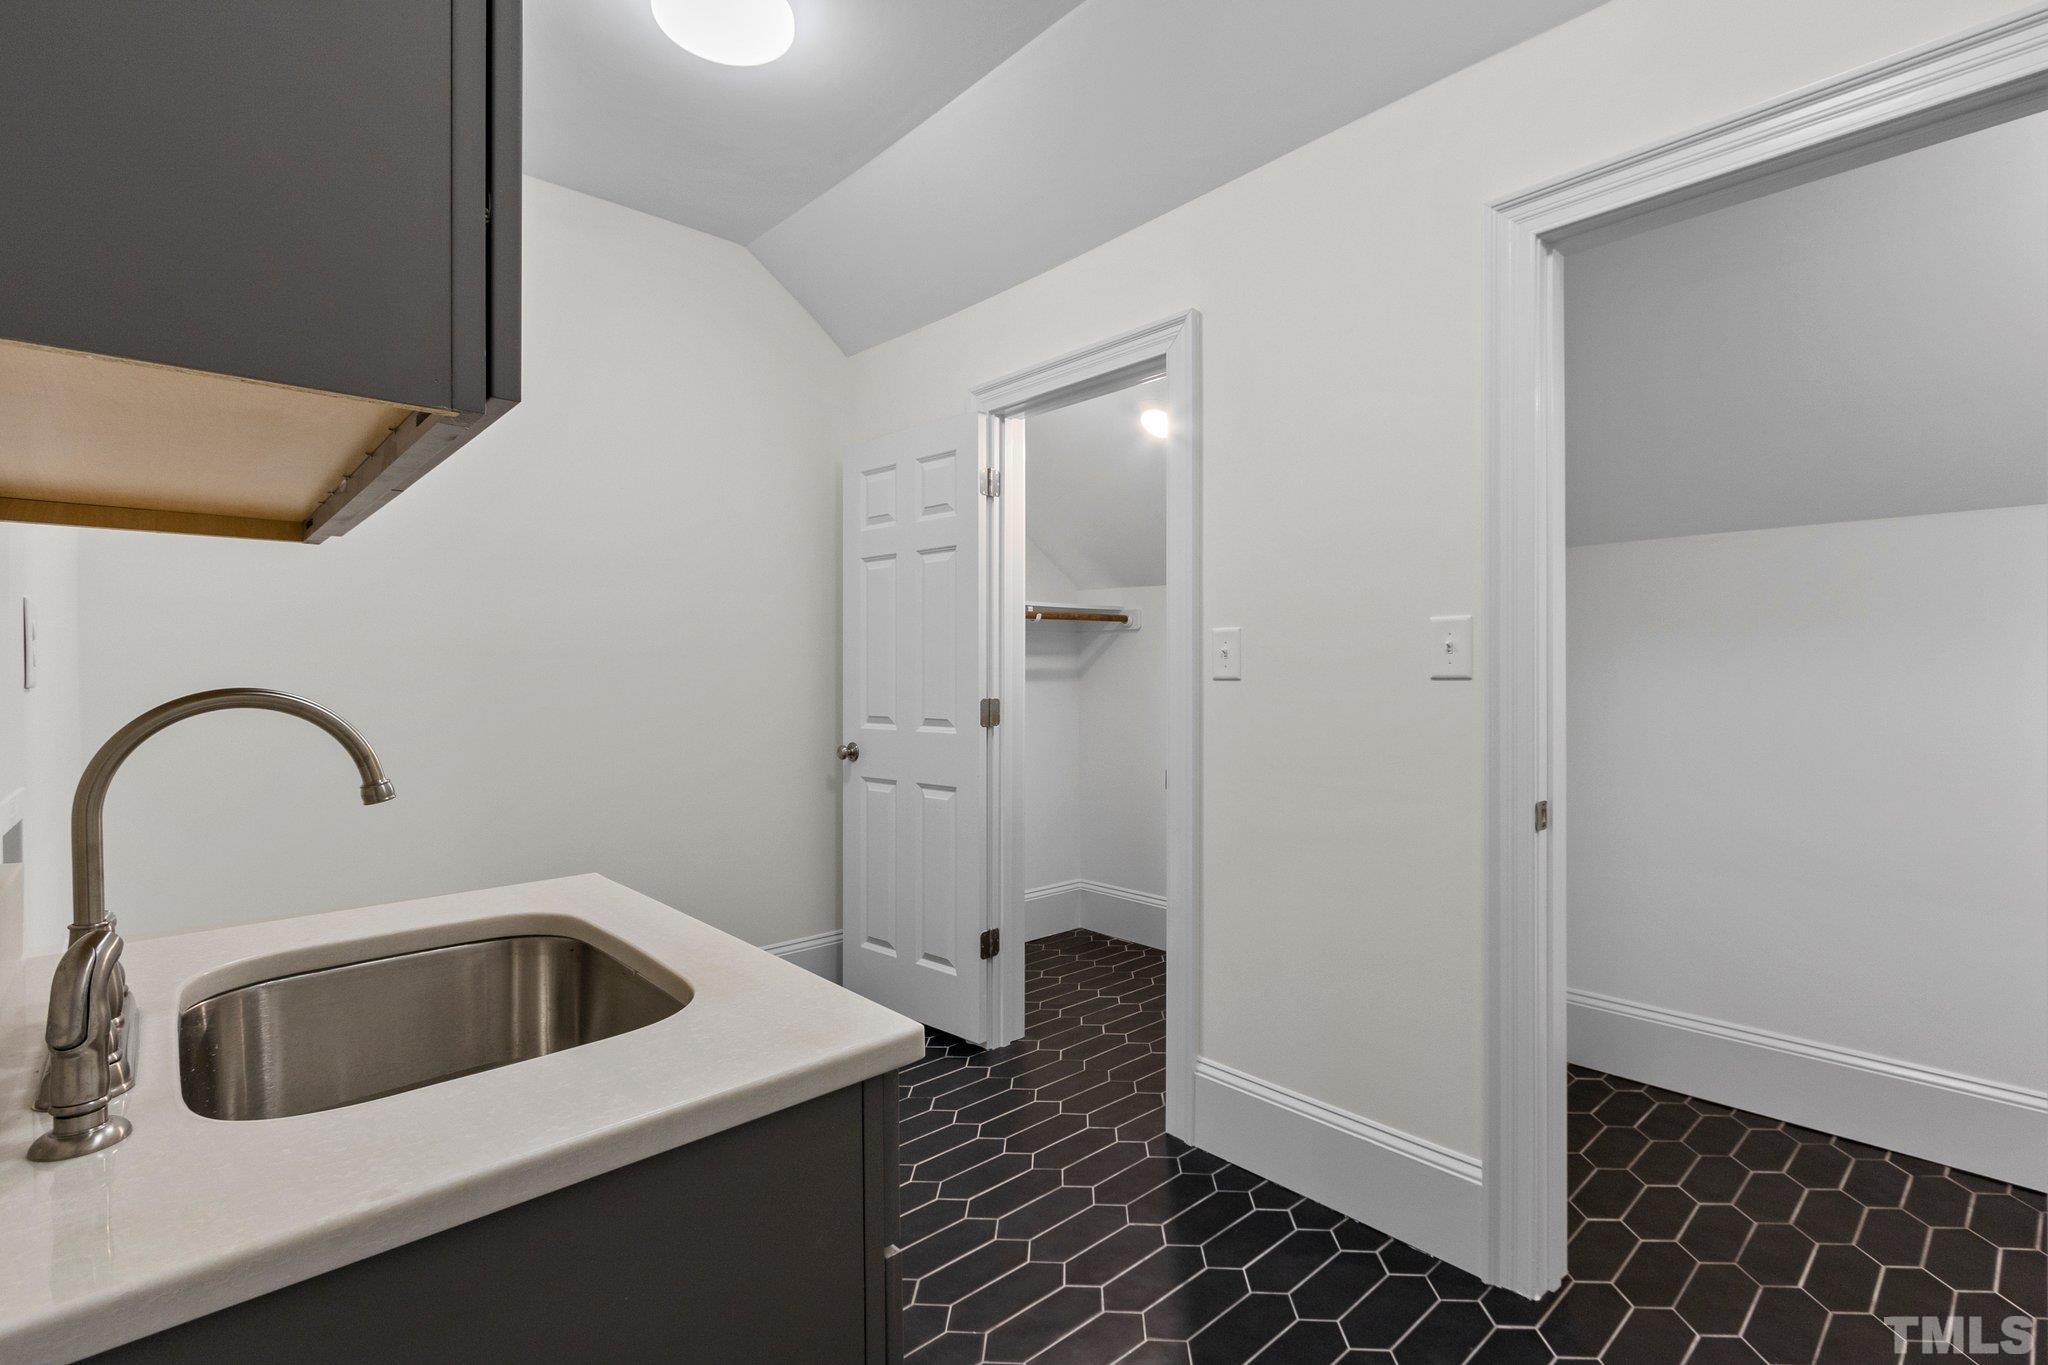 2nd Floor Laundry Room. Features a sink, storage cabinets and storage closets.